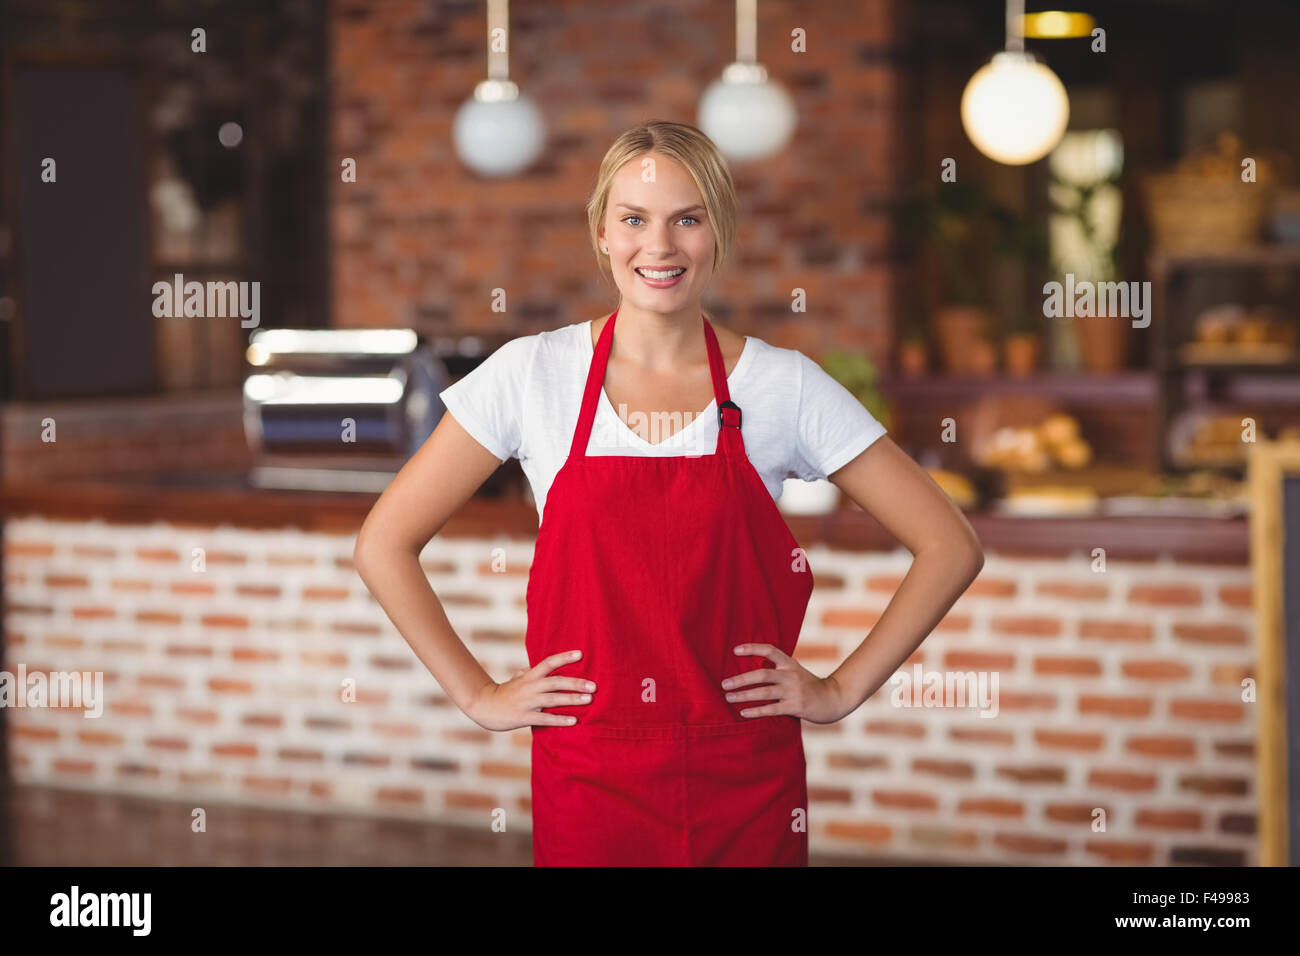 Pretty waitress with hands on hips Stock Photo